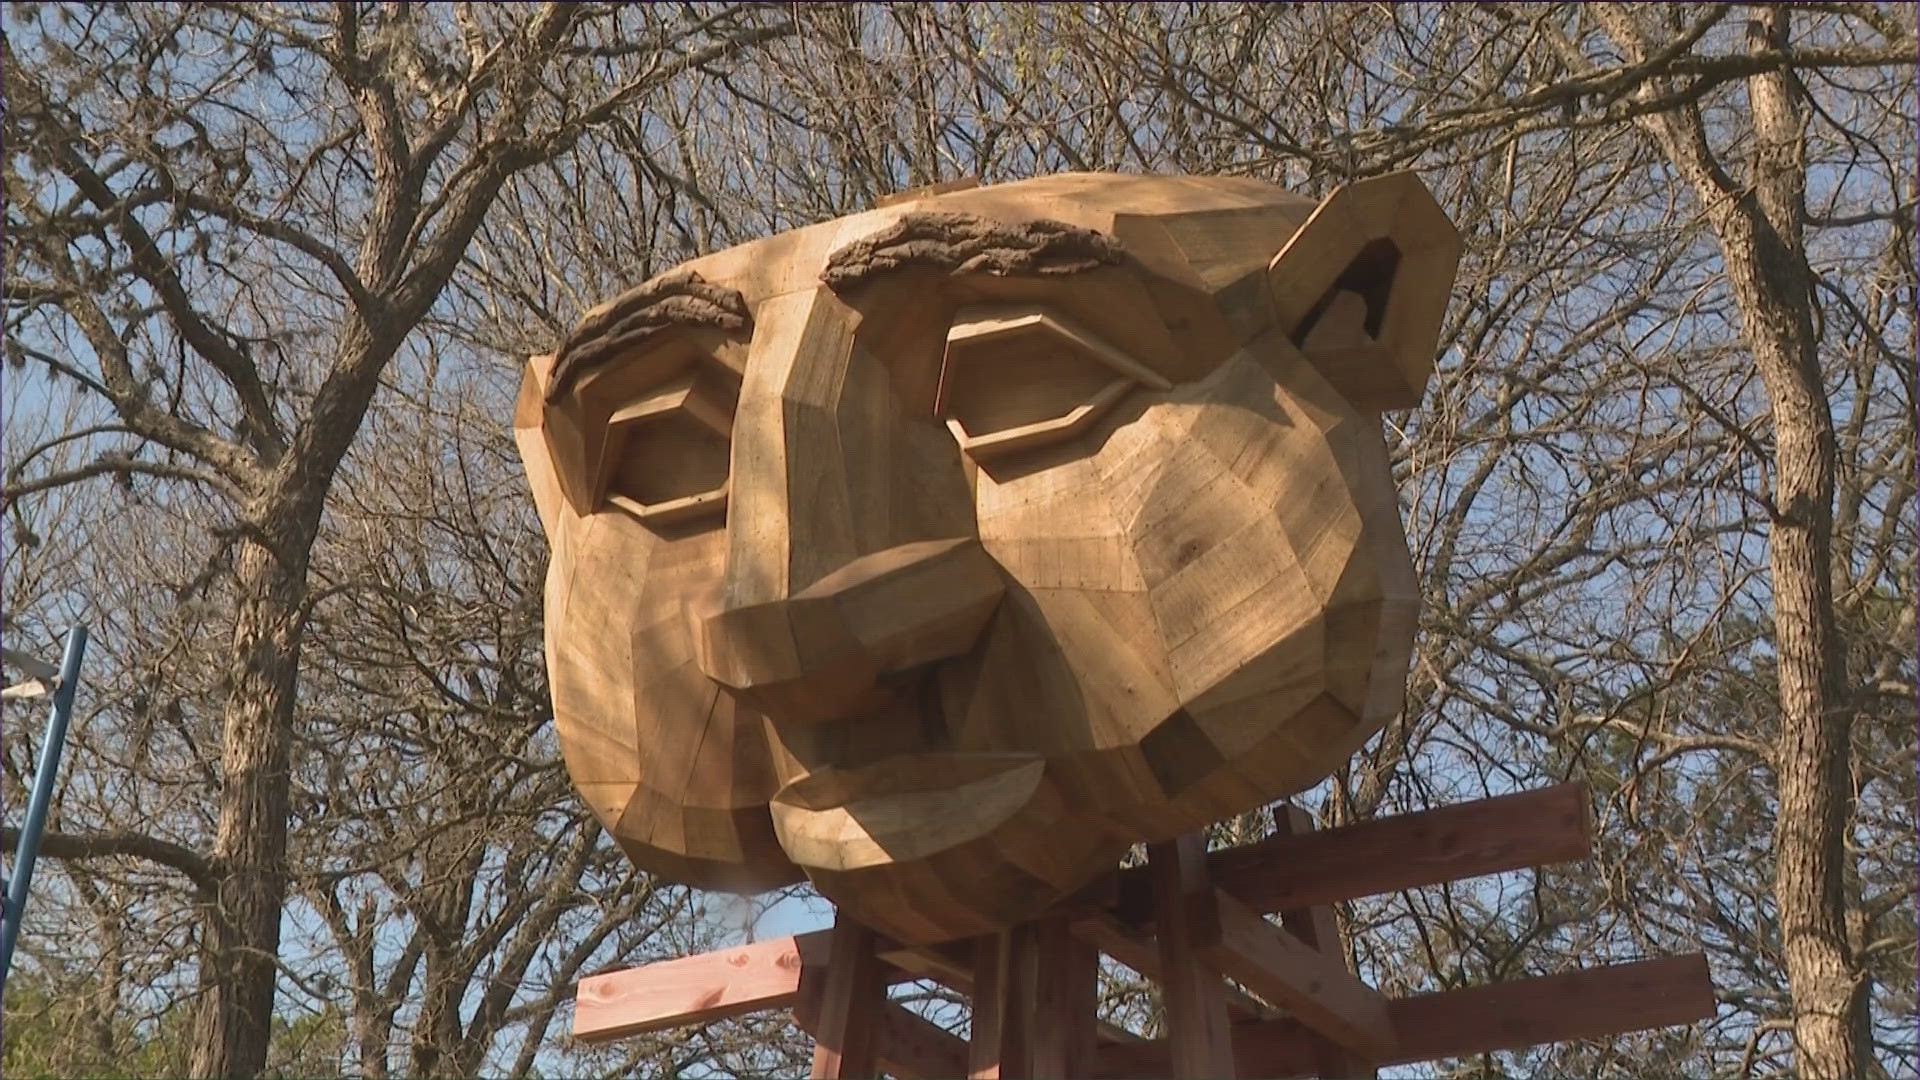 Work is underway on a new sculpture in Pease Park.